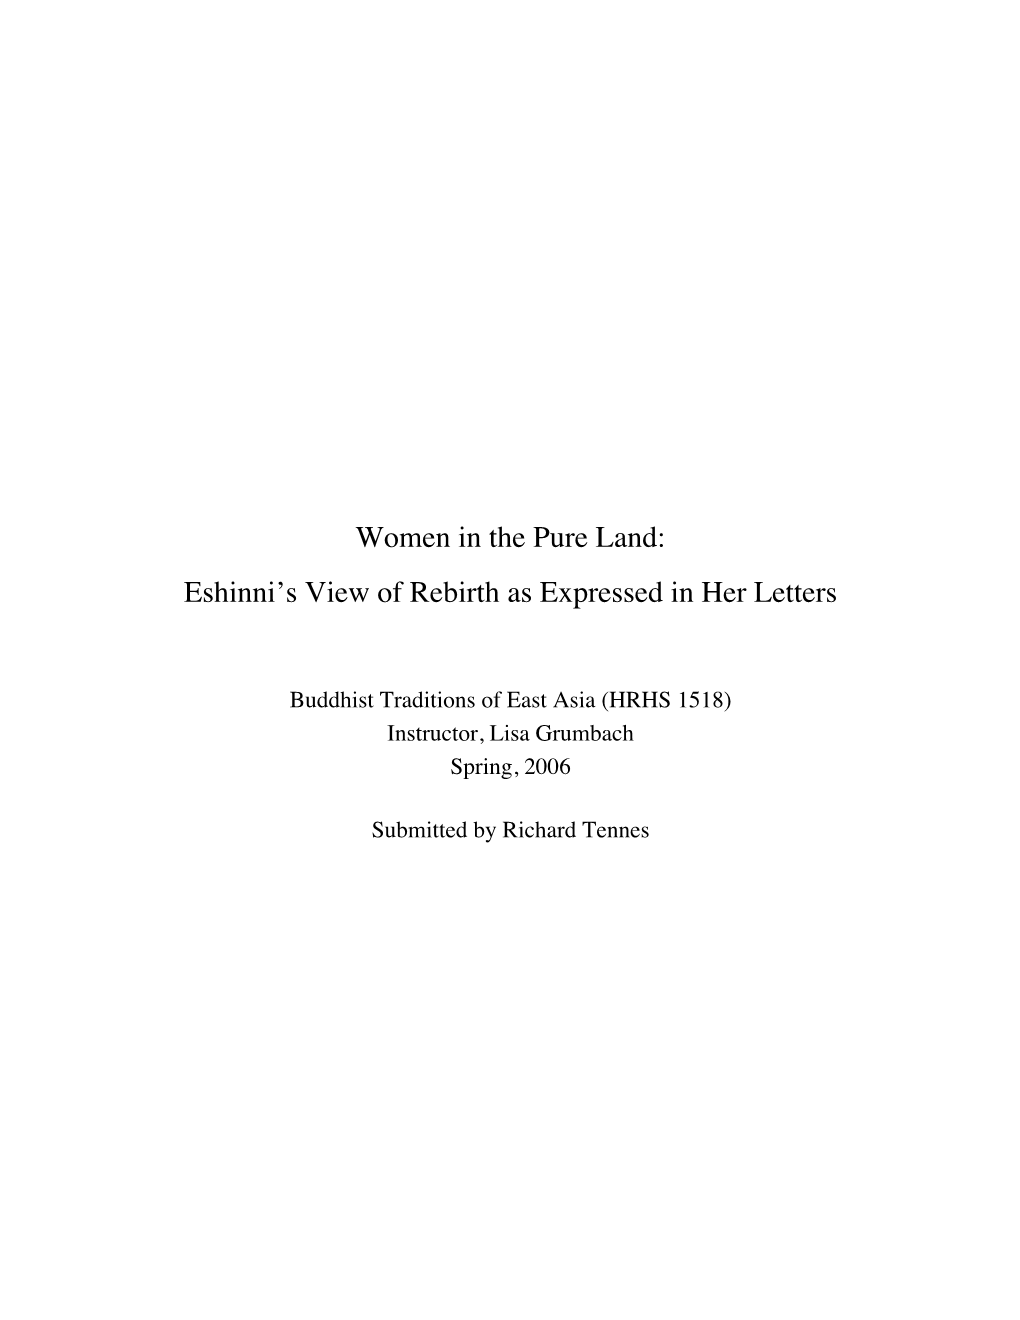 Women in the Pure Land: Eshinni's View of Rebirth As Expressed In